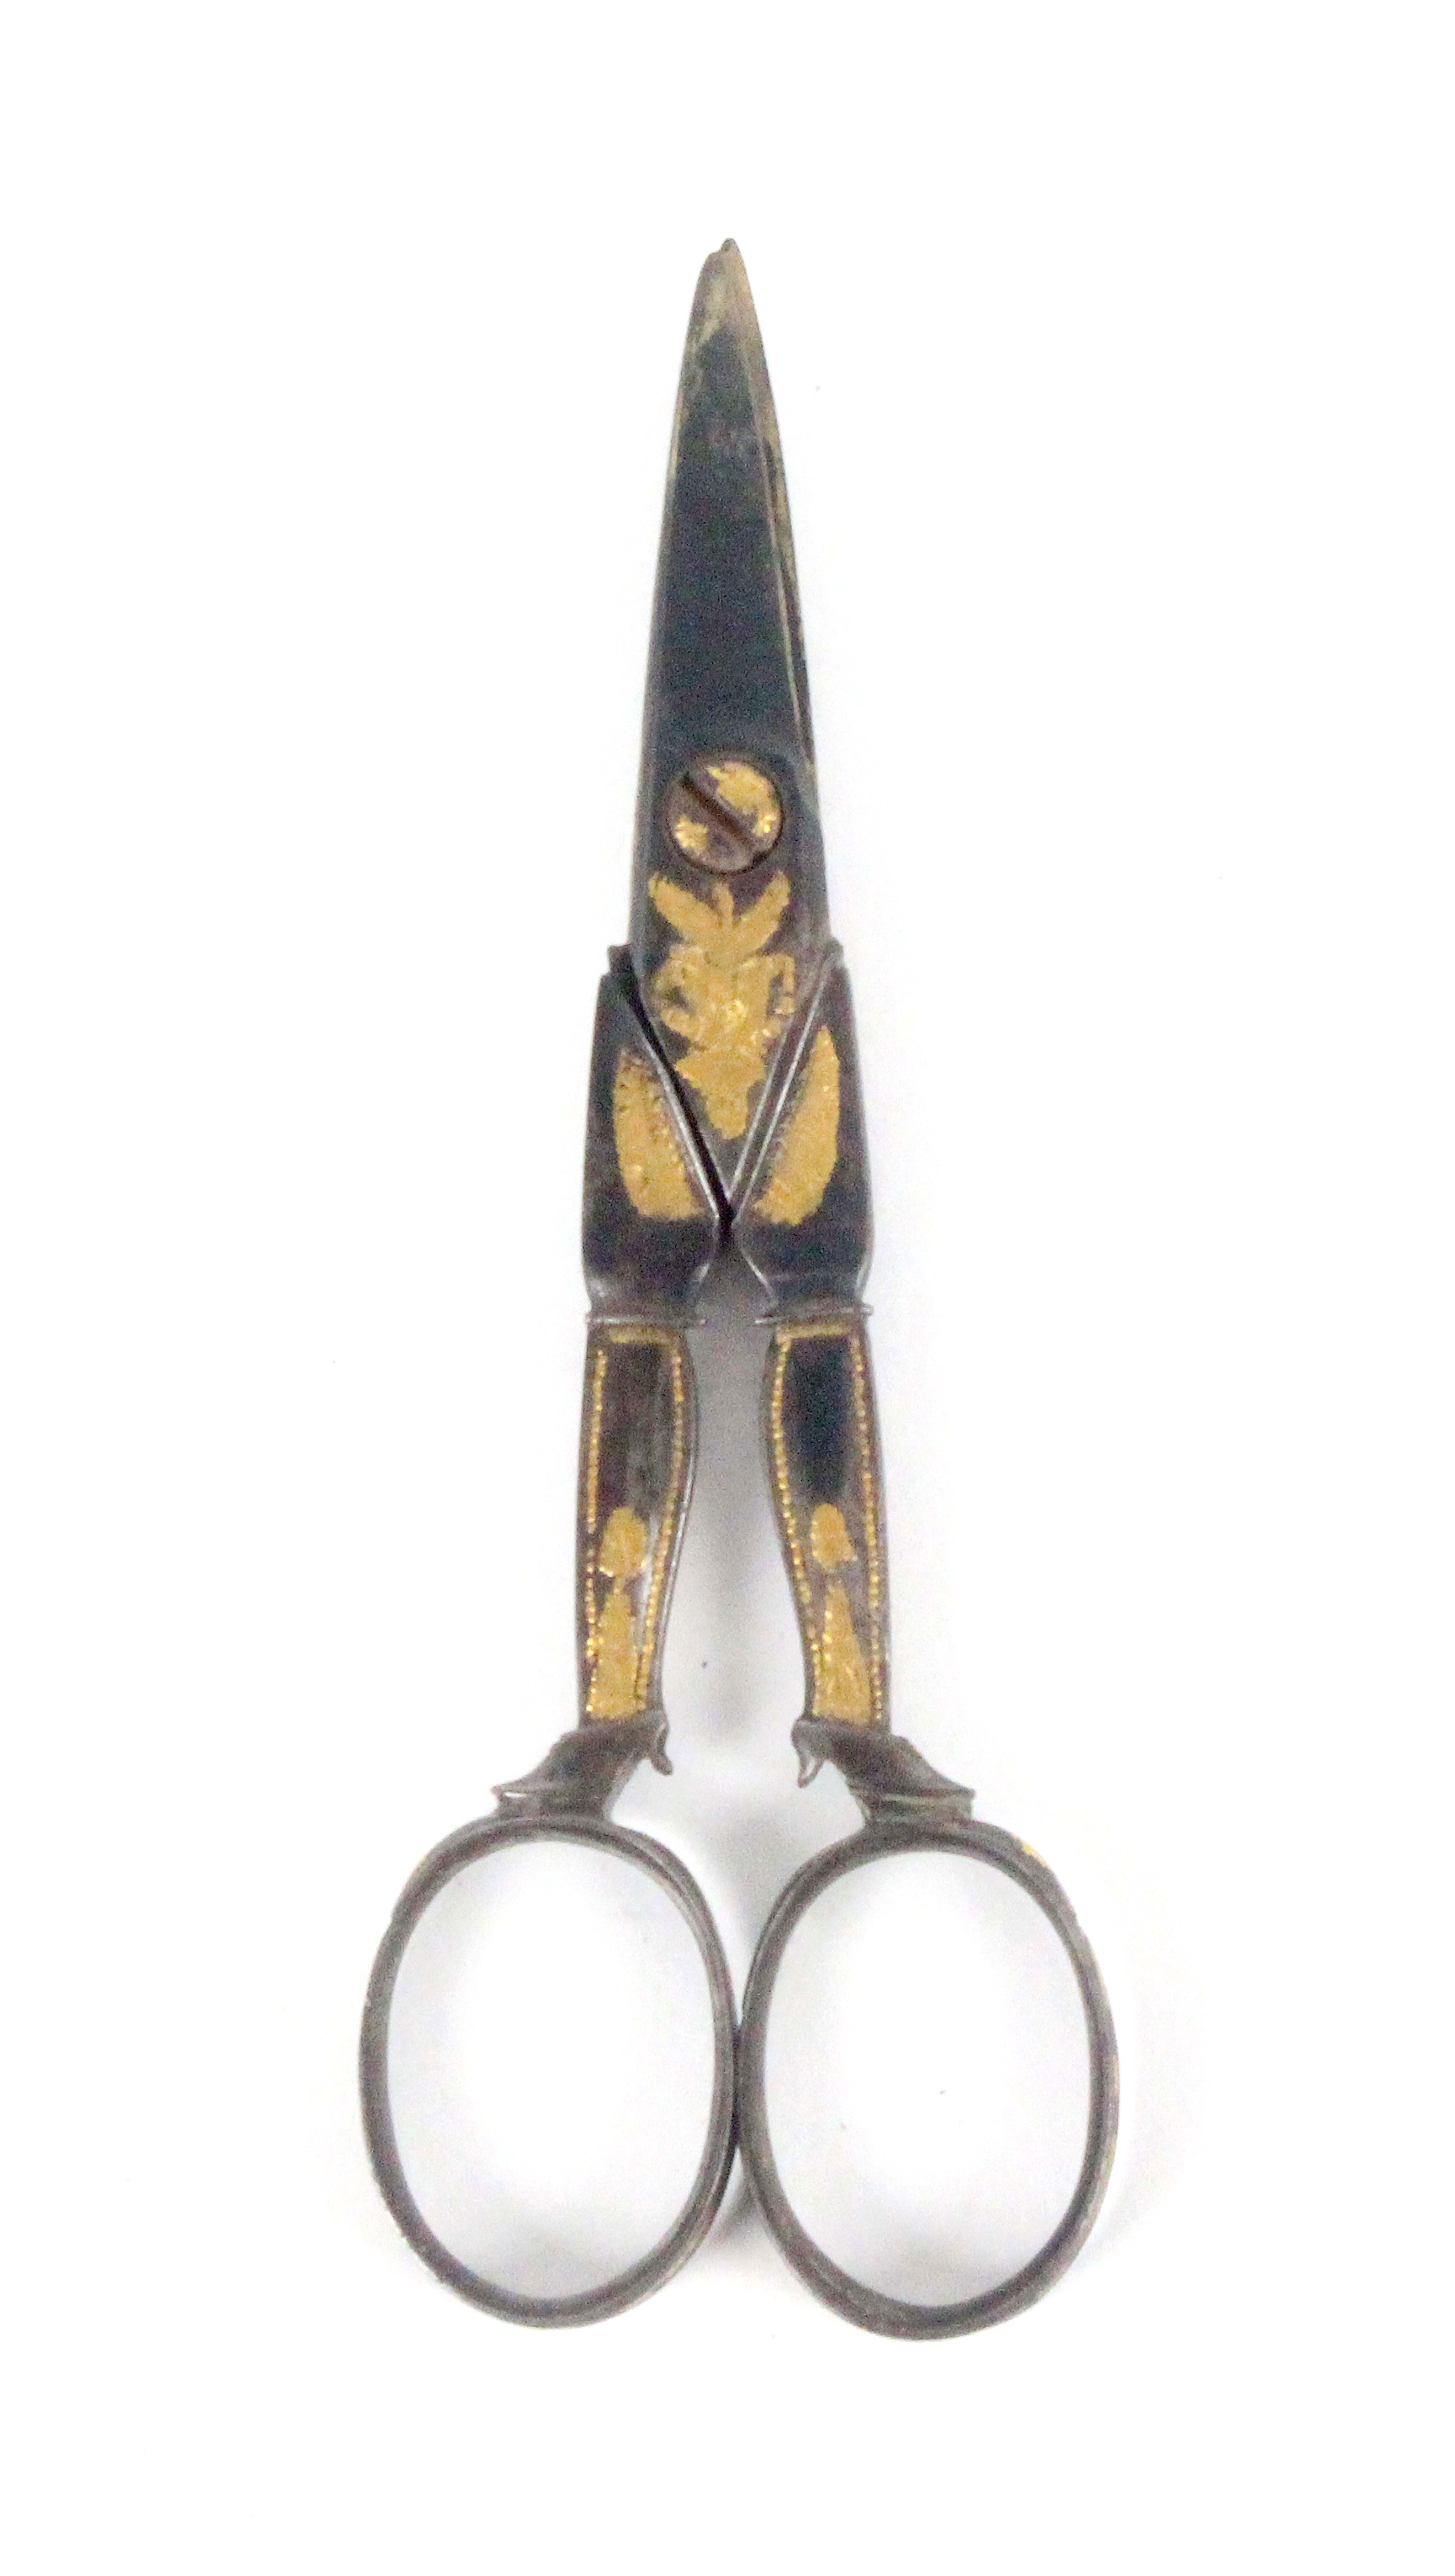 A pair of late 18th Century gold mounted steel scissors, English or French, short tapering blades - Image 2 of 2